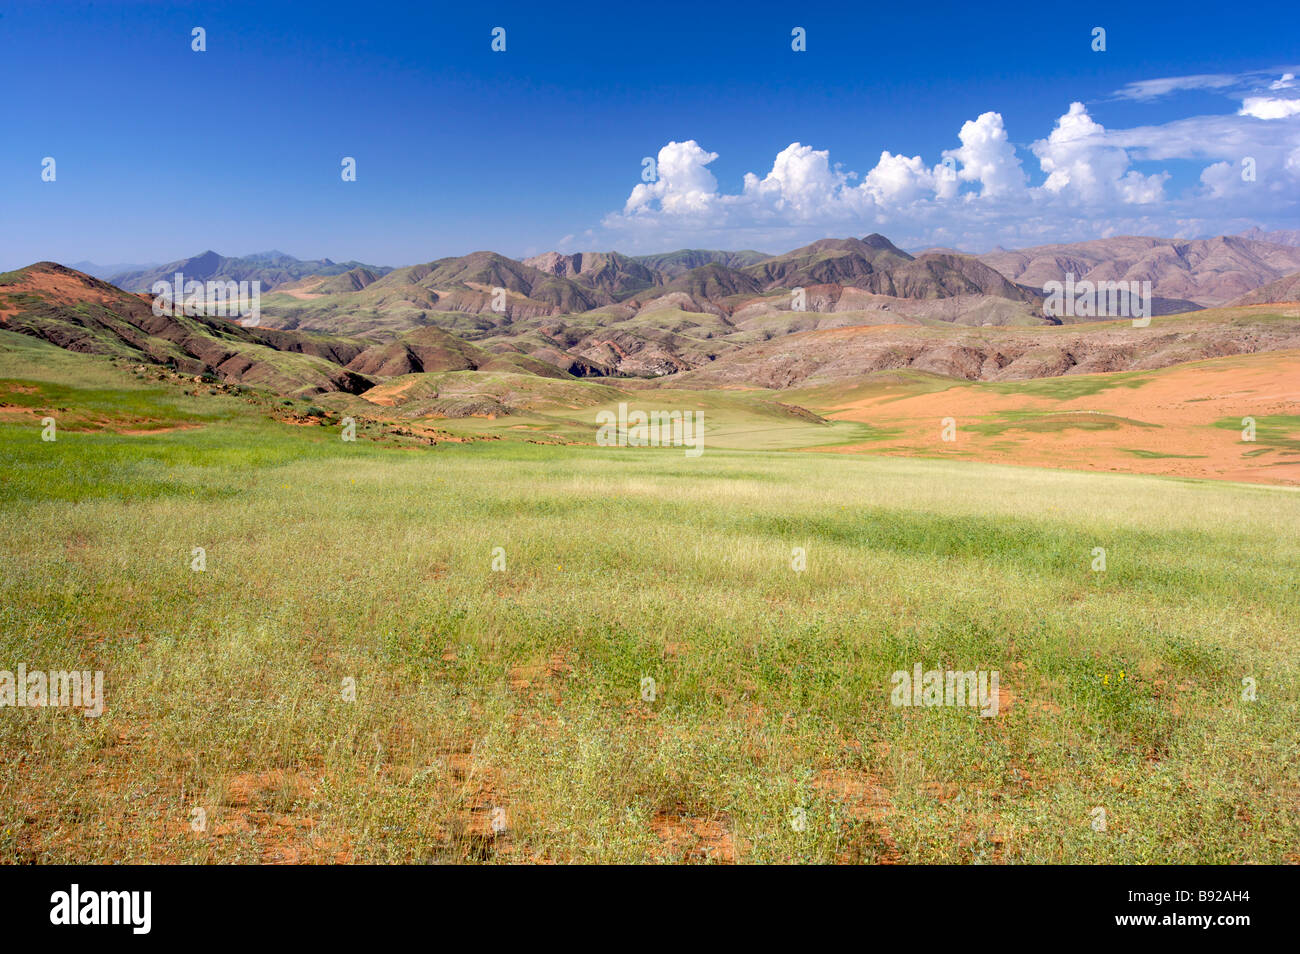 Scene of Kunene River valley Near Kunene River with Angola mountains in background Namibia Stock Photo